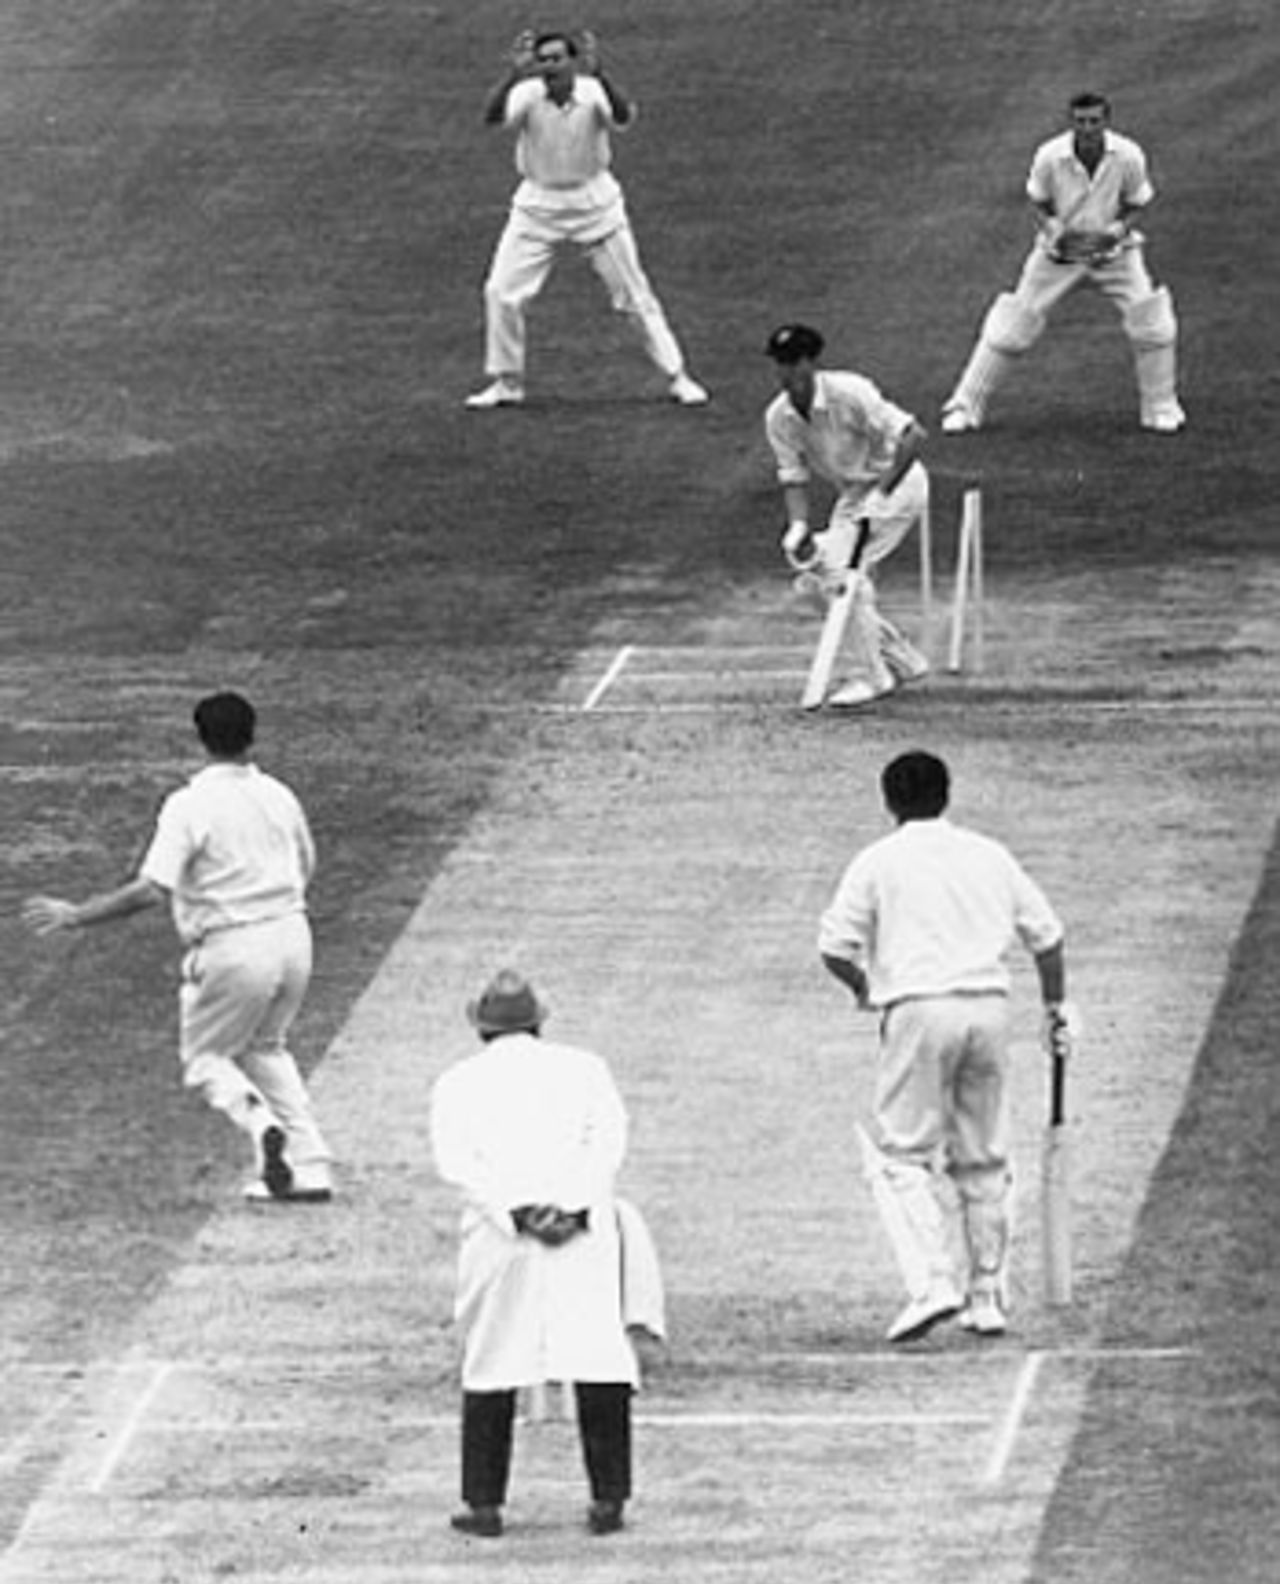 Ian Redpath is bowled centre stump by England's Fred Trueman during the 5th Test at the Oval - it was his 299th Test wicket, England v Australia, The Oval, August 15, 1964
